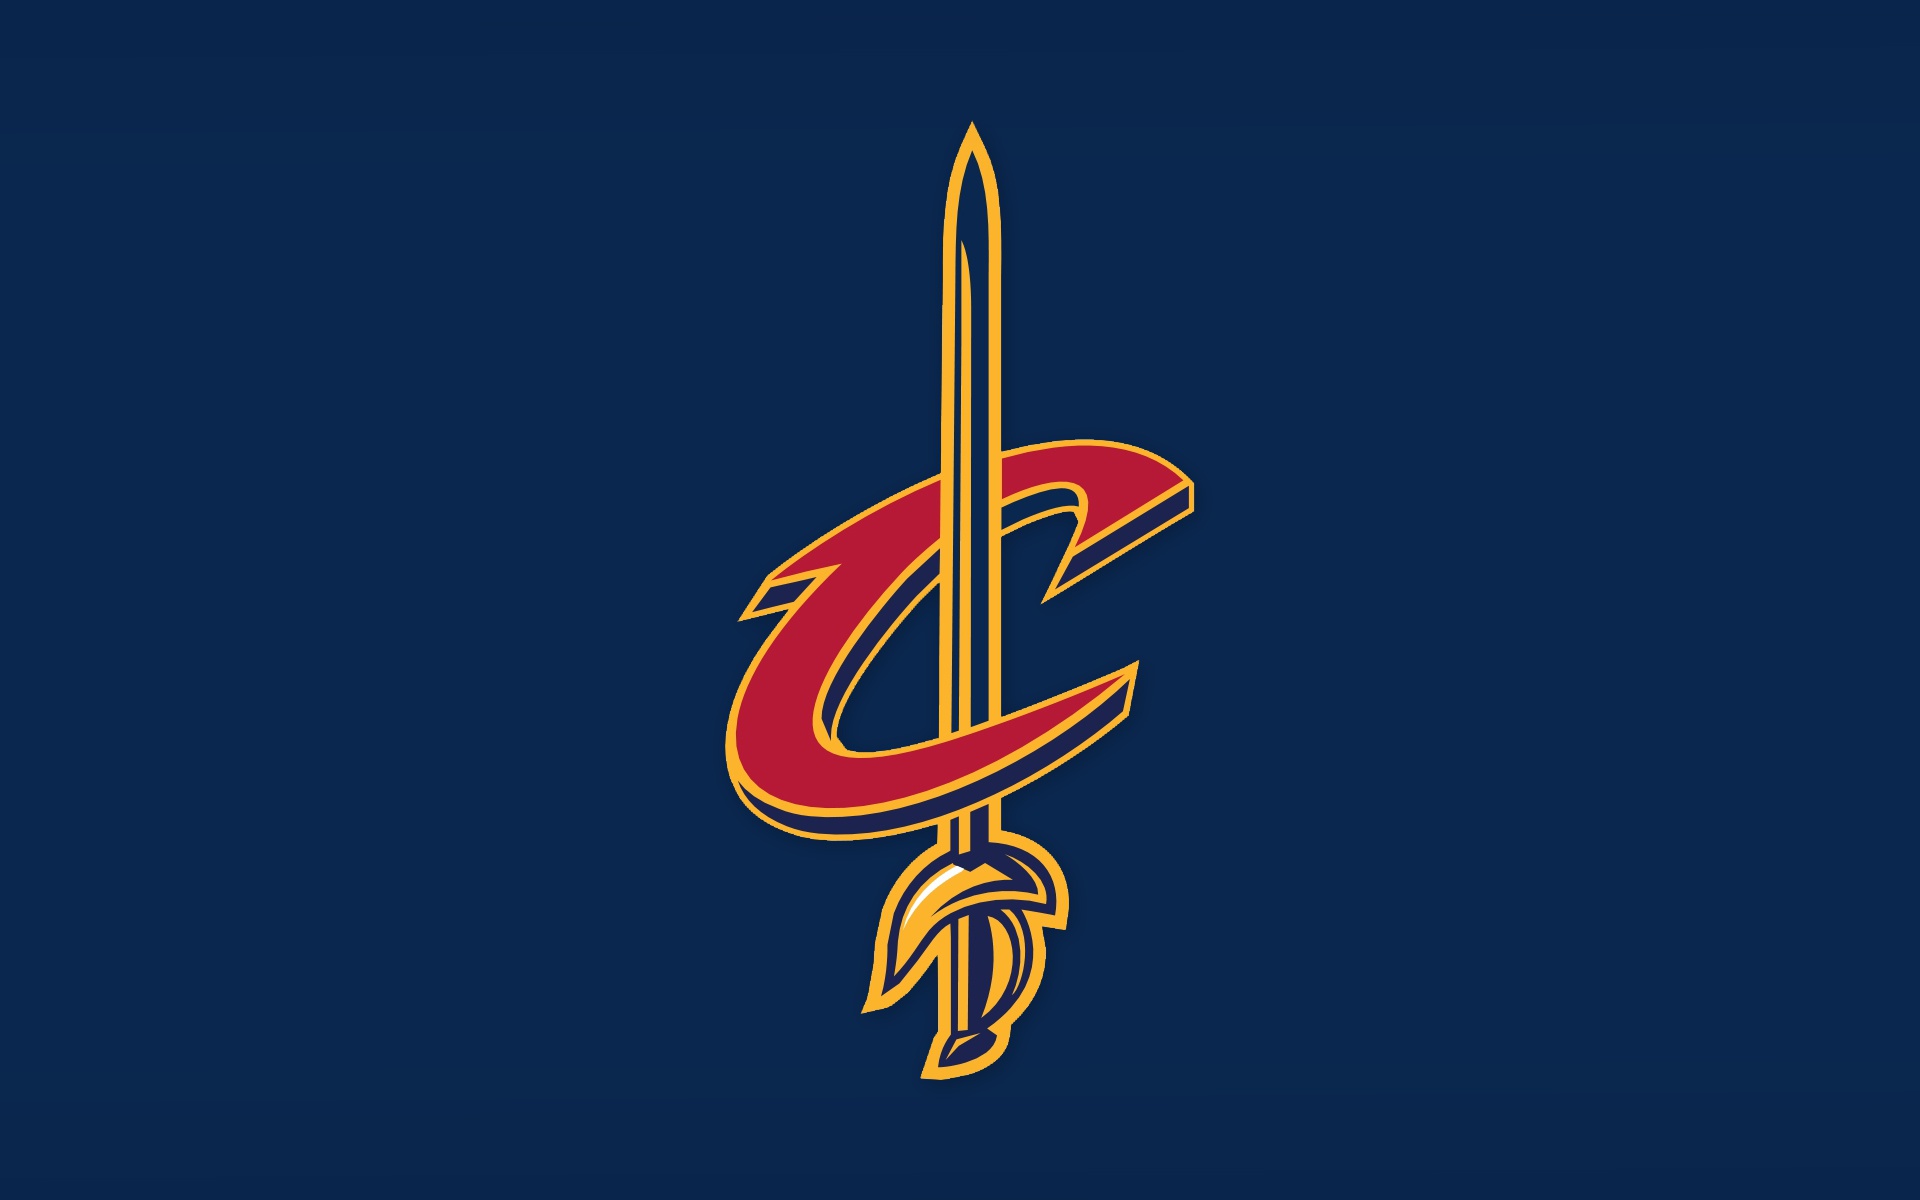 Goodyear 'Wingfoot' logo to be added to Cavaliers' jersey for 2017